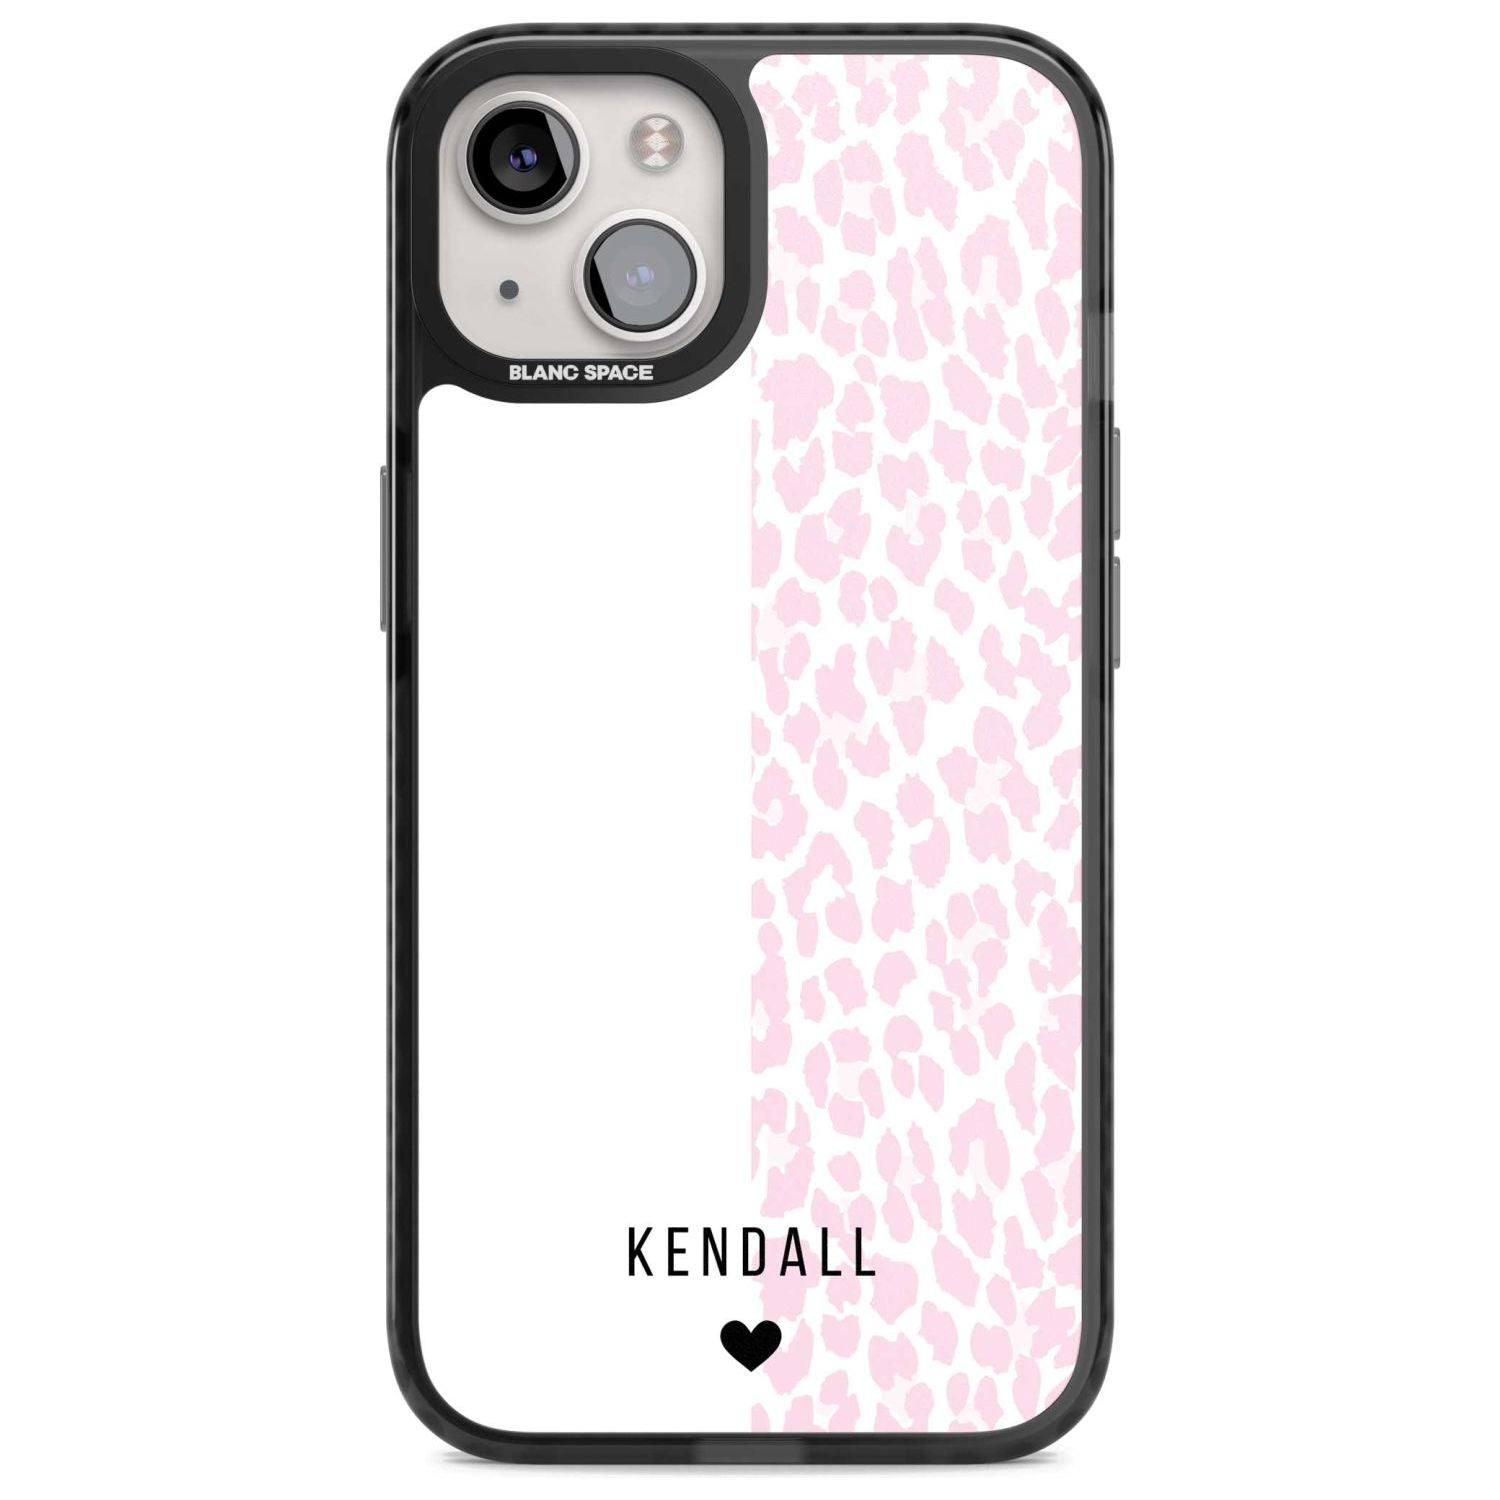 Personalised Pink & White Leopard Spots Custom Phone Case iPhone 15 Plus / Magsafe Black Impact Case,iPhone 15 / Magsafe Black Impact Case,iPhone 14 Plus / Magsafe Black Impact Case,iPhone 14 / Magsafe Black Impact Case,iPhone 13 / Magsafe Black Impact Case Blanc Space